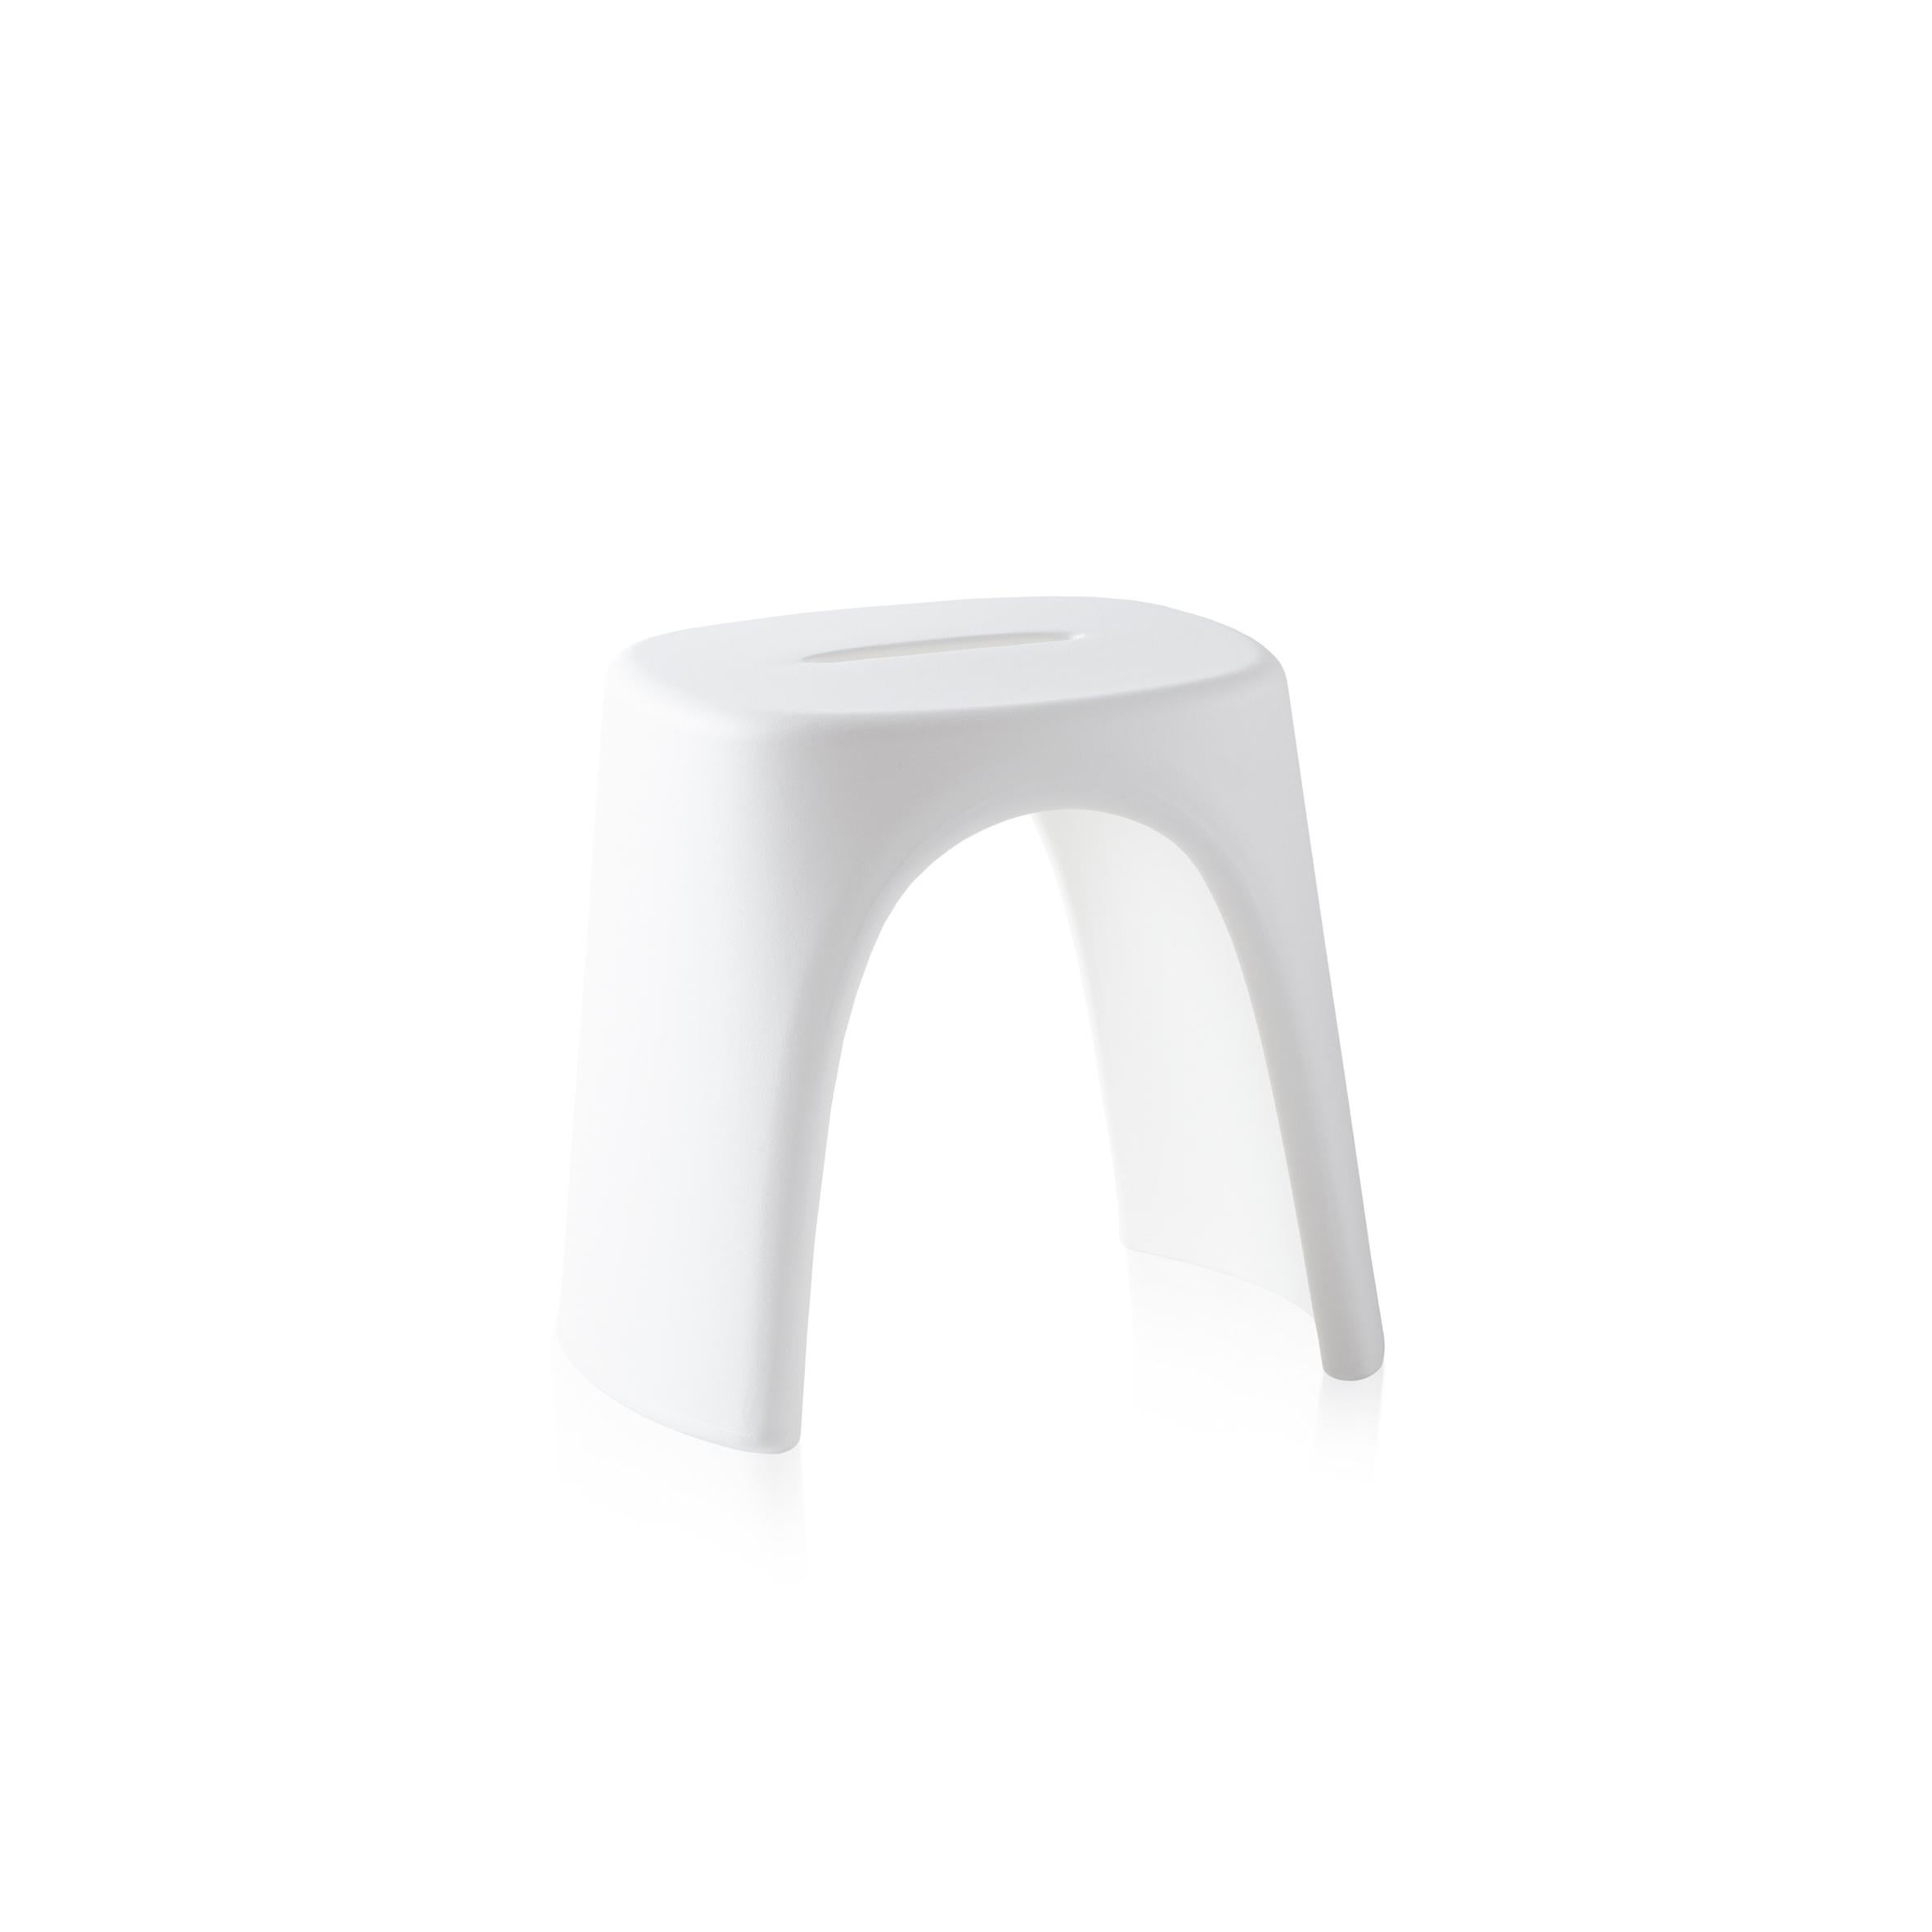 Slide Design Amélie Sgabello Stool in Milky White by Italo Pertichini In New Condition For Sale In Brooklyn, NY